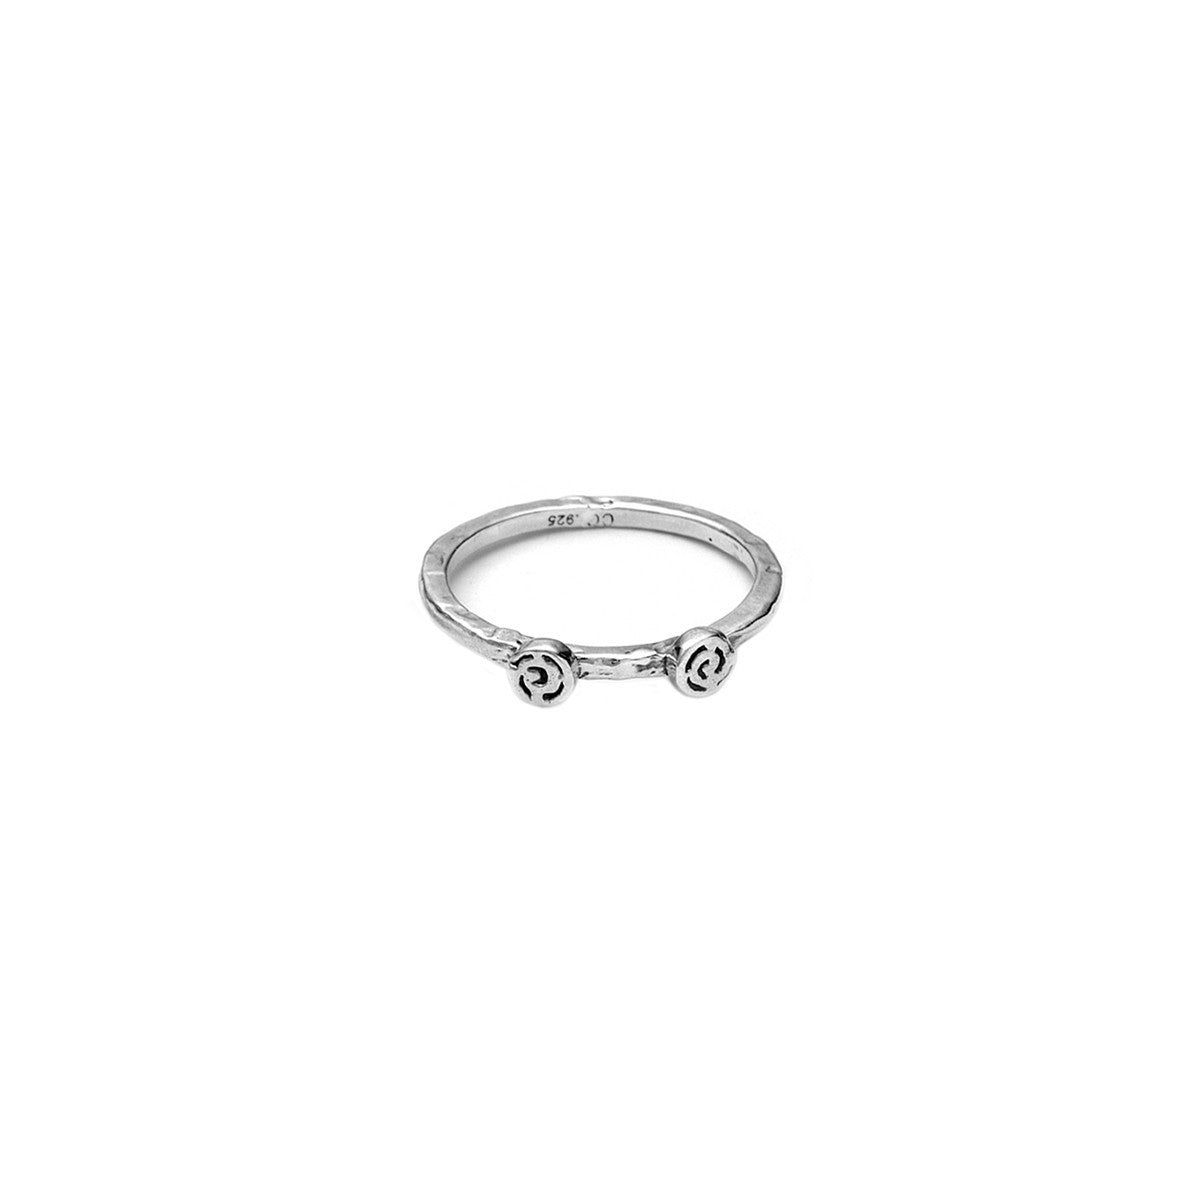 Barnes Metalwork Sterling Silver Stacking Ring - Cynthia Gale New York Jewelry